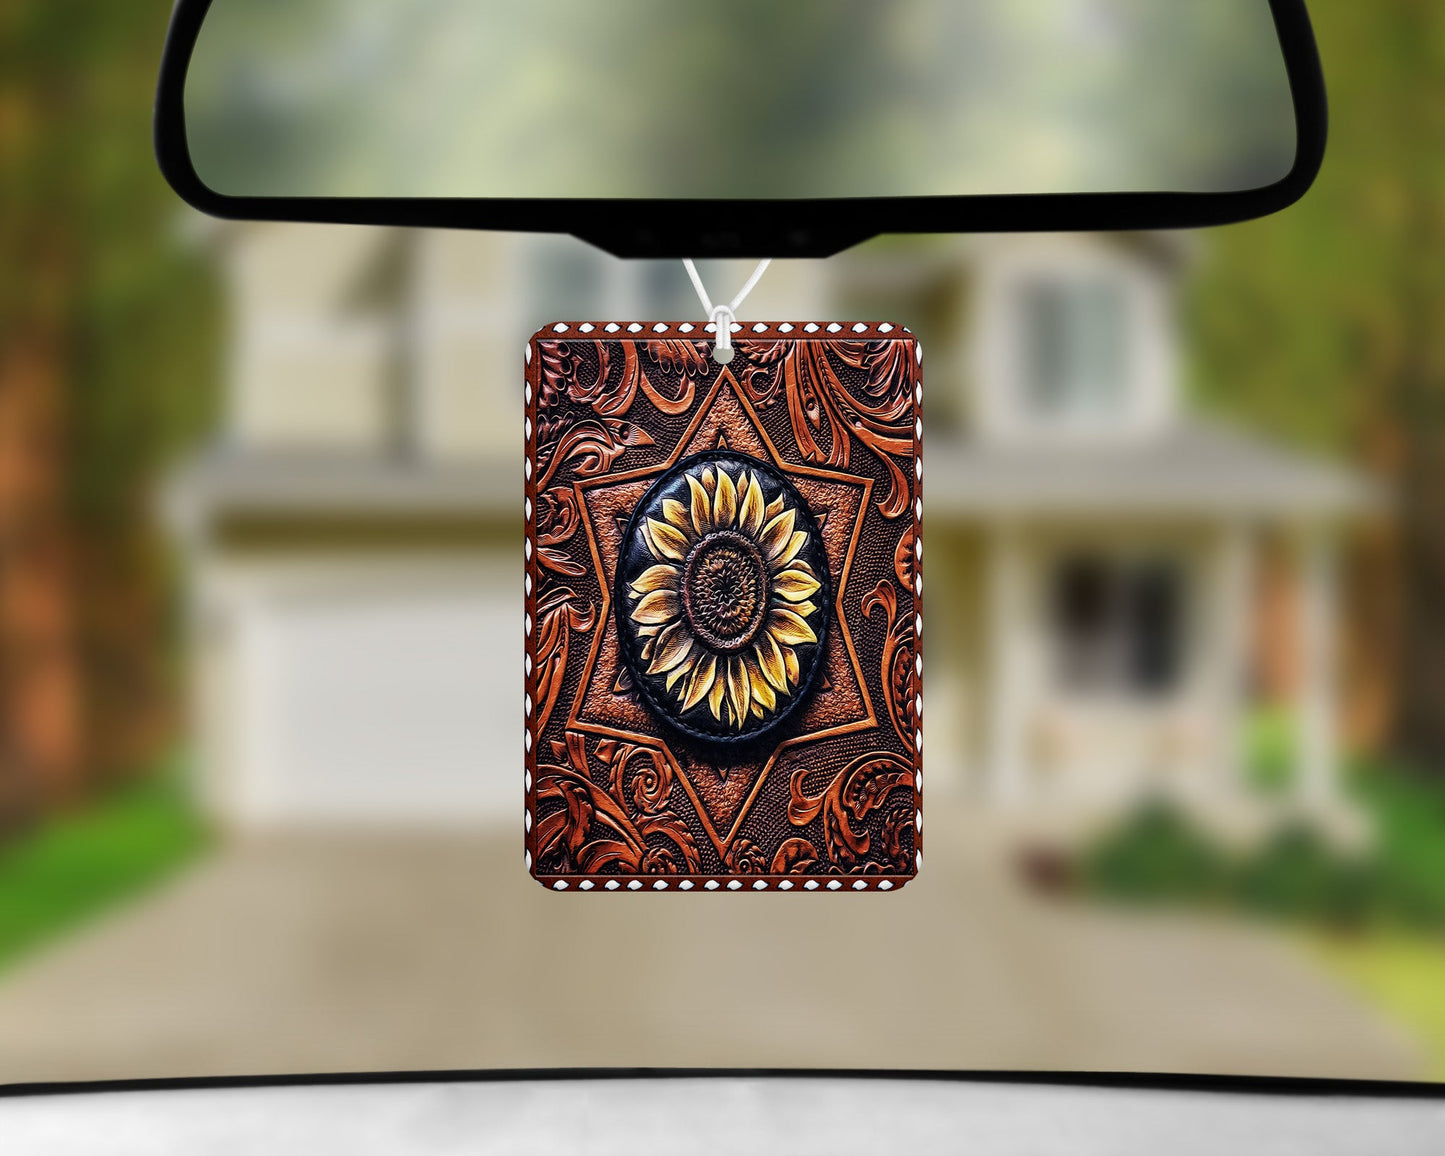 Leather Sunflower|Freshie|Includes Scent Bottle - Vehicle Air Freshener